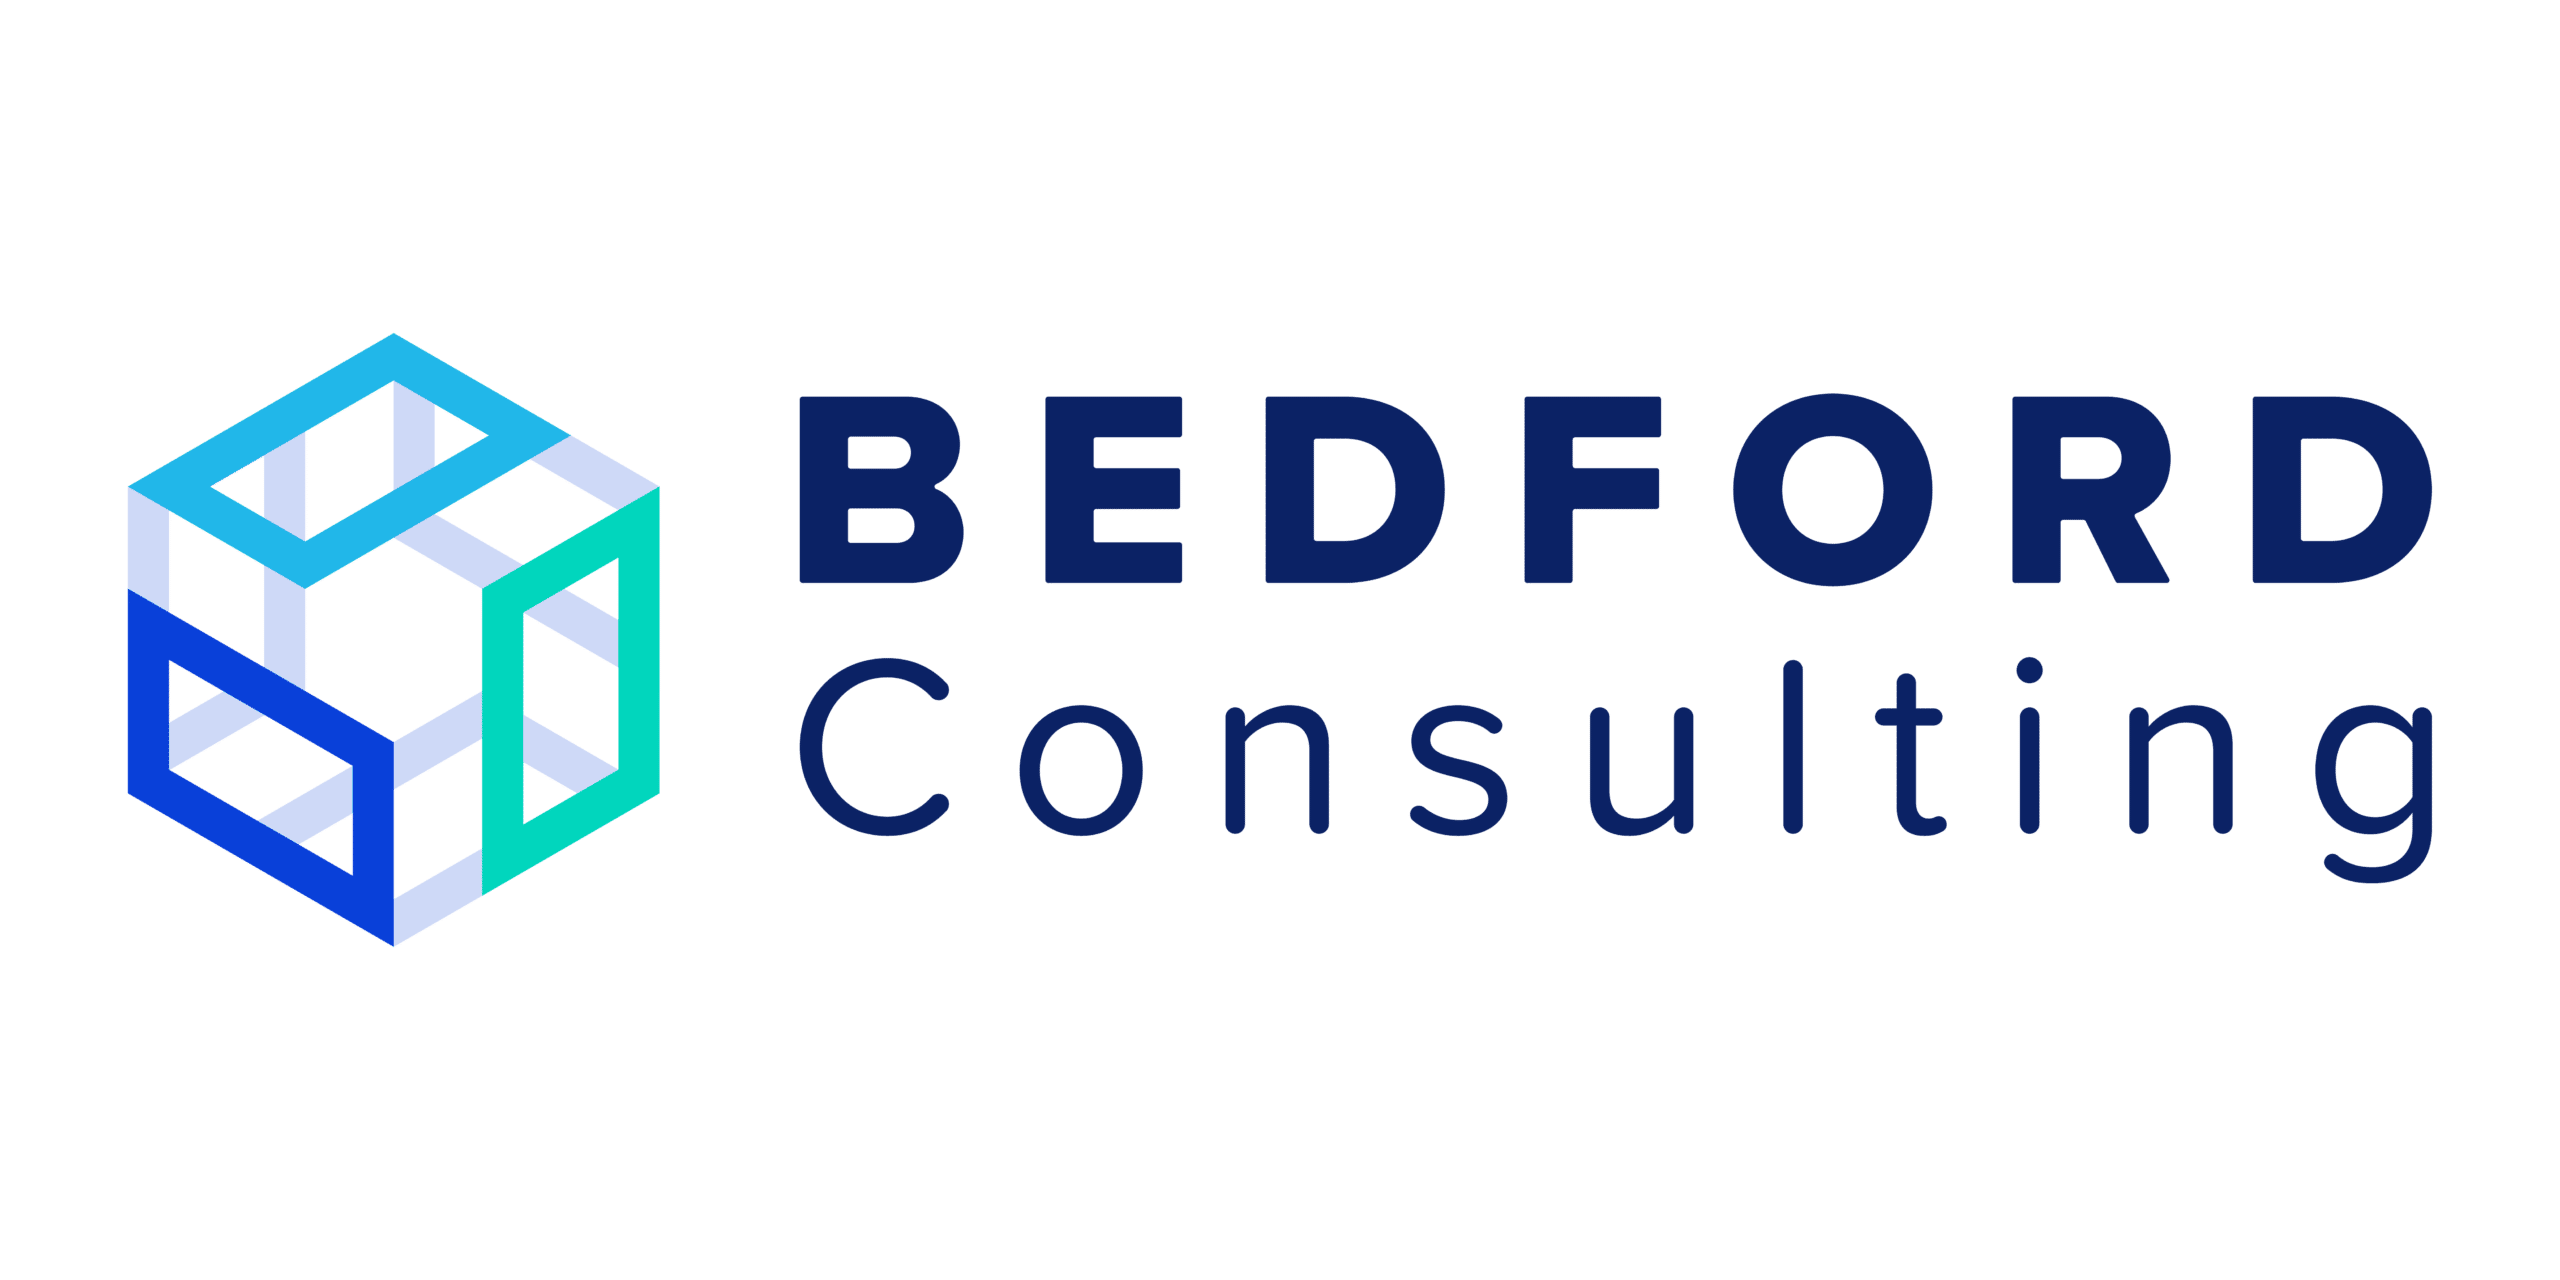 Bedford Consulting logo